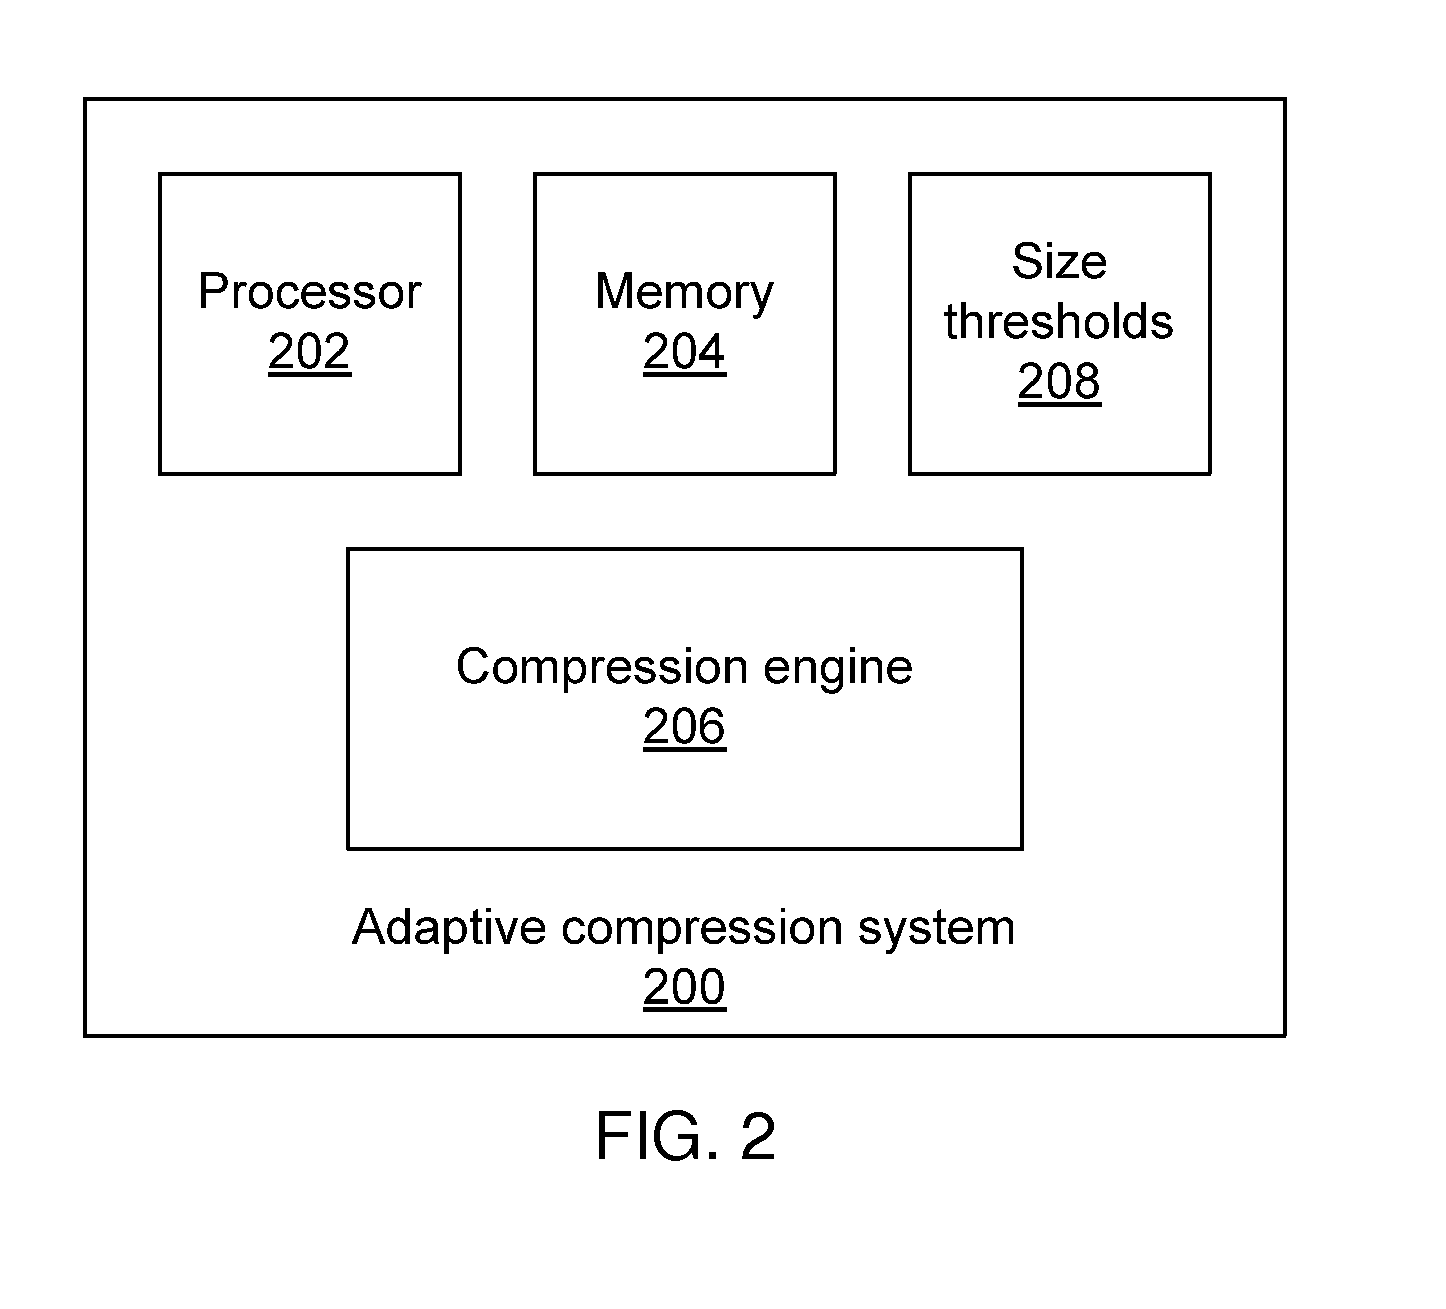 Adaptive compression supporting output size thresholds